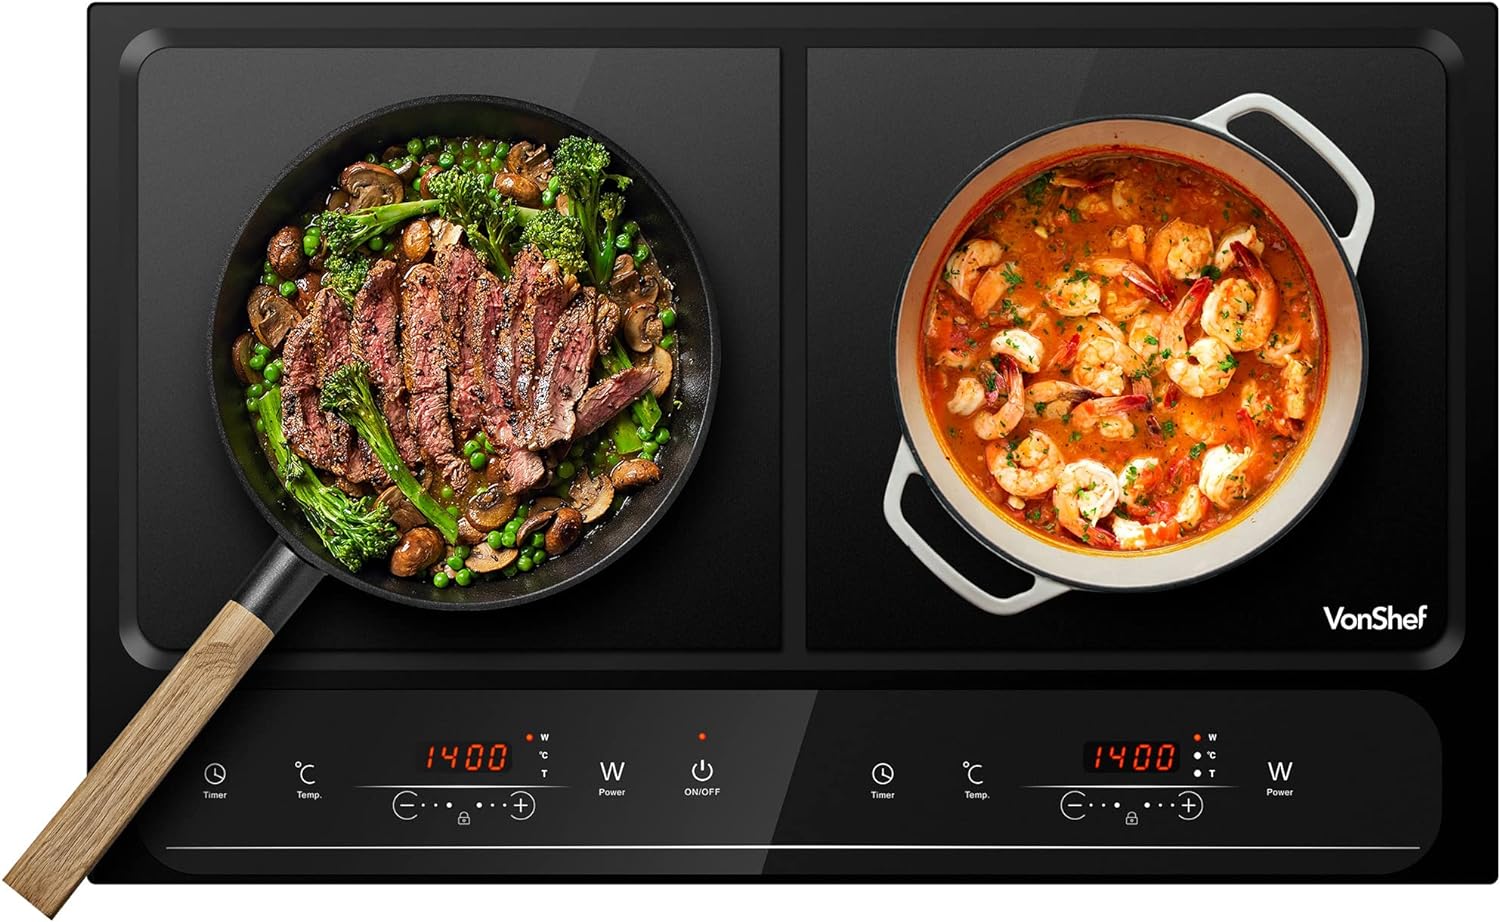 VonShef Double Induction Hob - 2800W Portable Dual, Twin Plate Electric Table Top with LED Display, Built - In Timer, 10 Heat Settings 60 - 240°C - Black - Amazing Gadgets Outlet